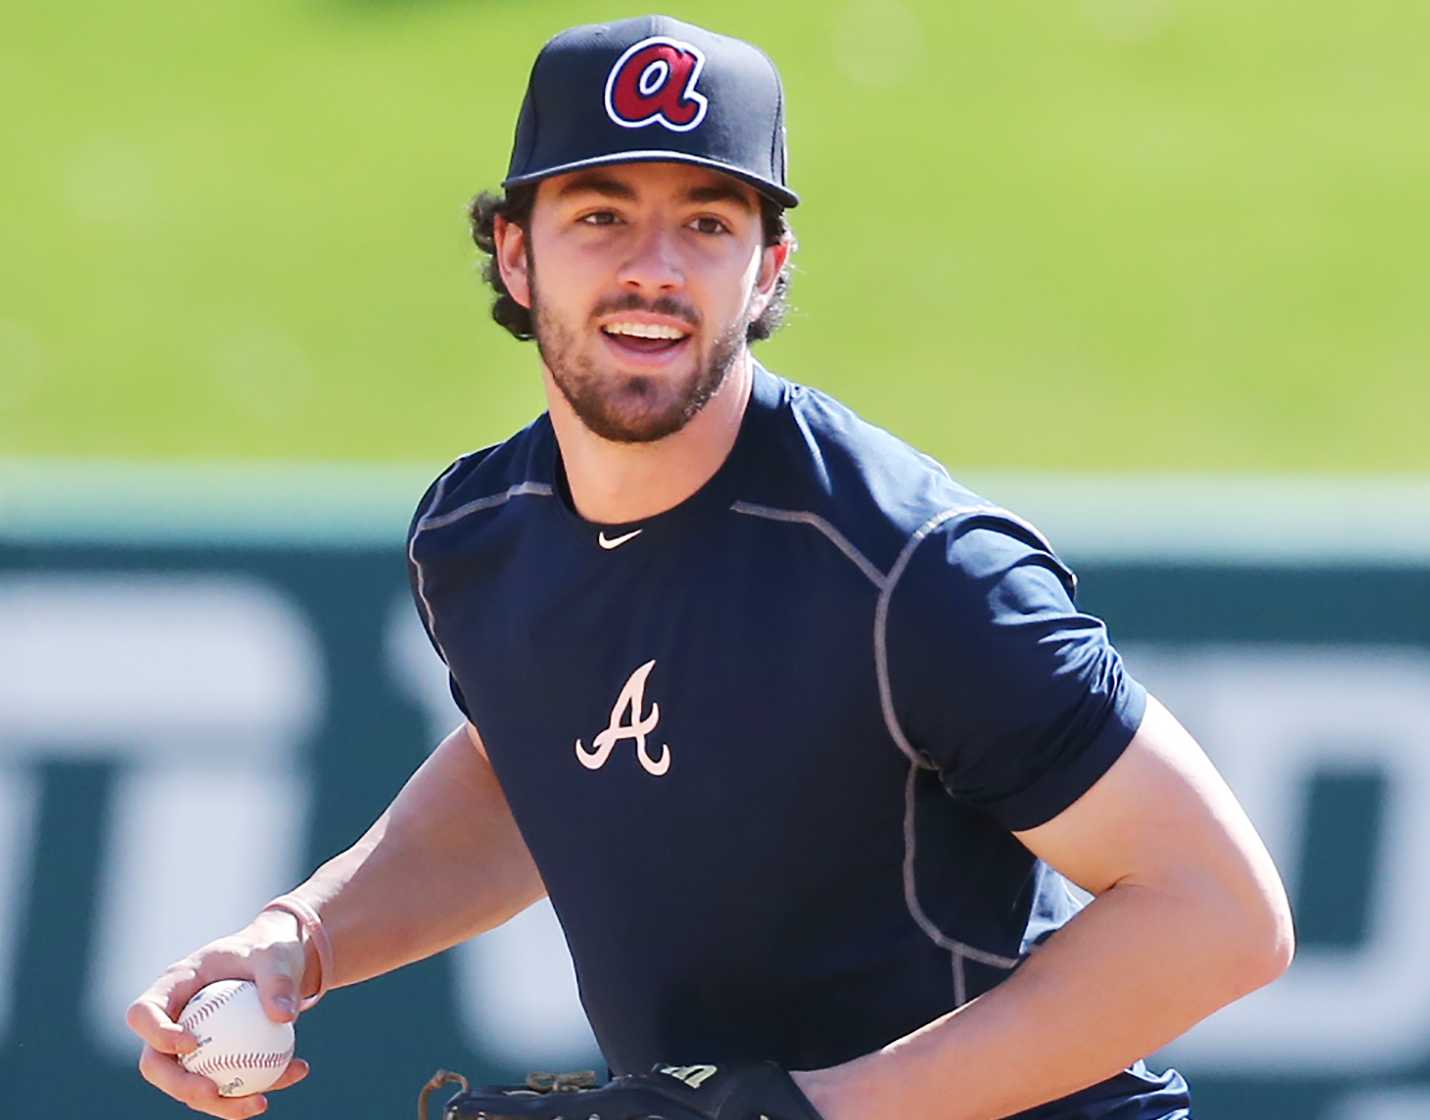 Durability and redundancy: In praise of Dansby Swanson - Bleed Cubbie Blue